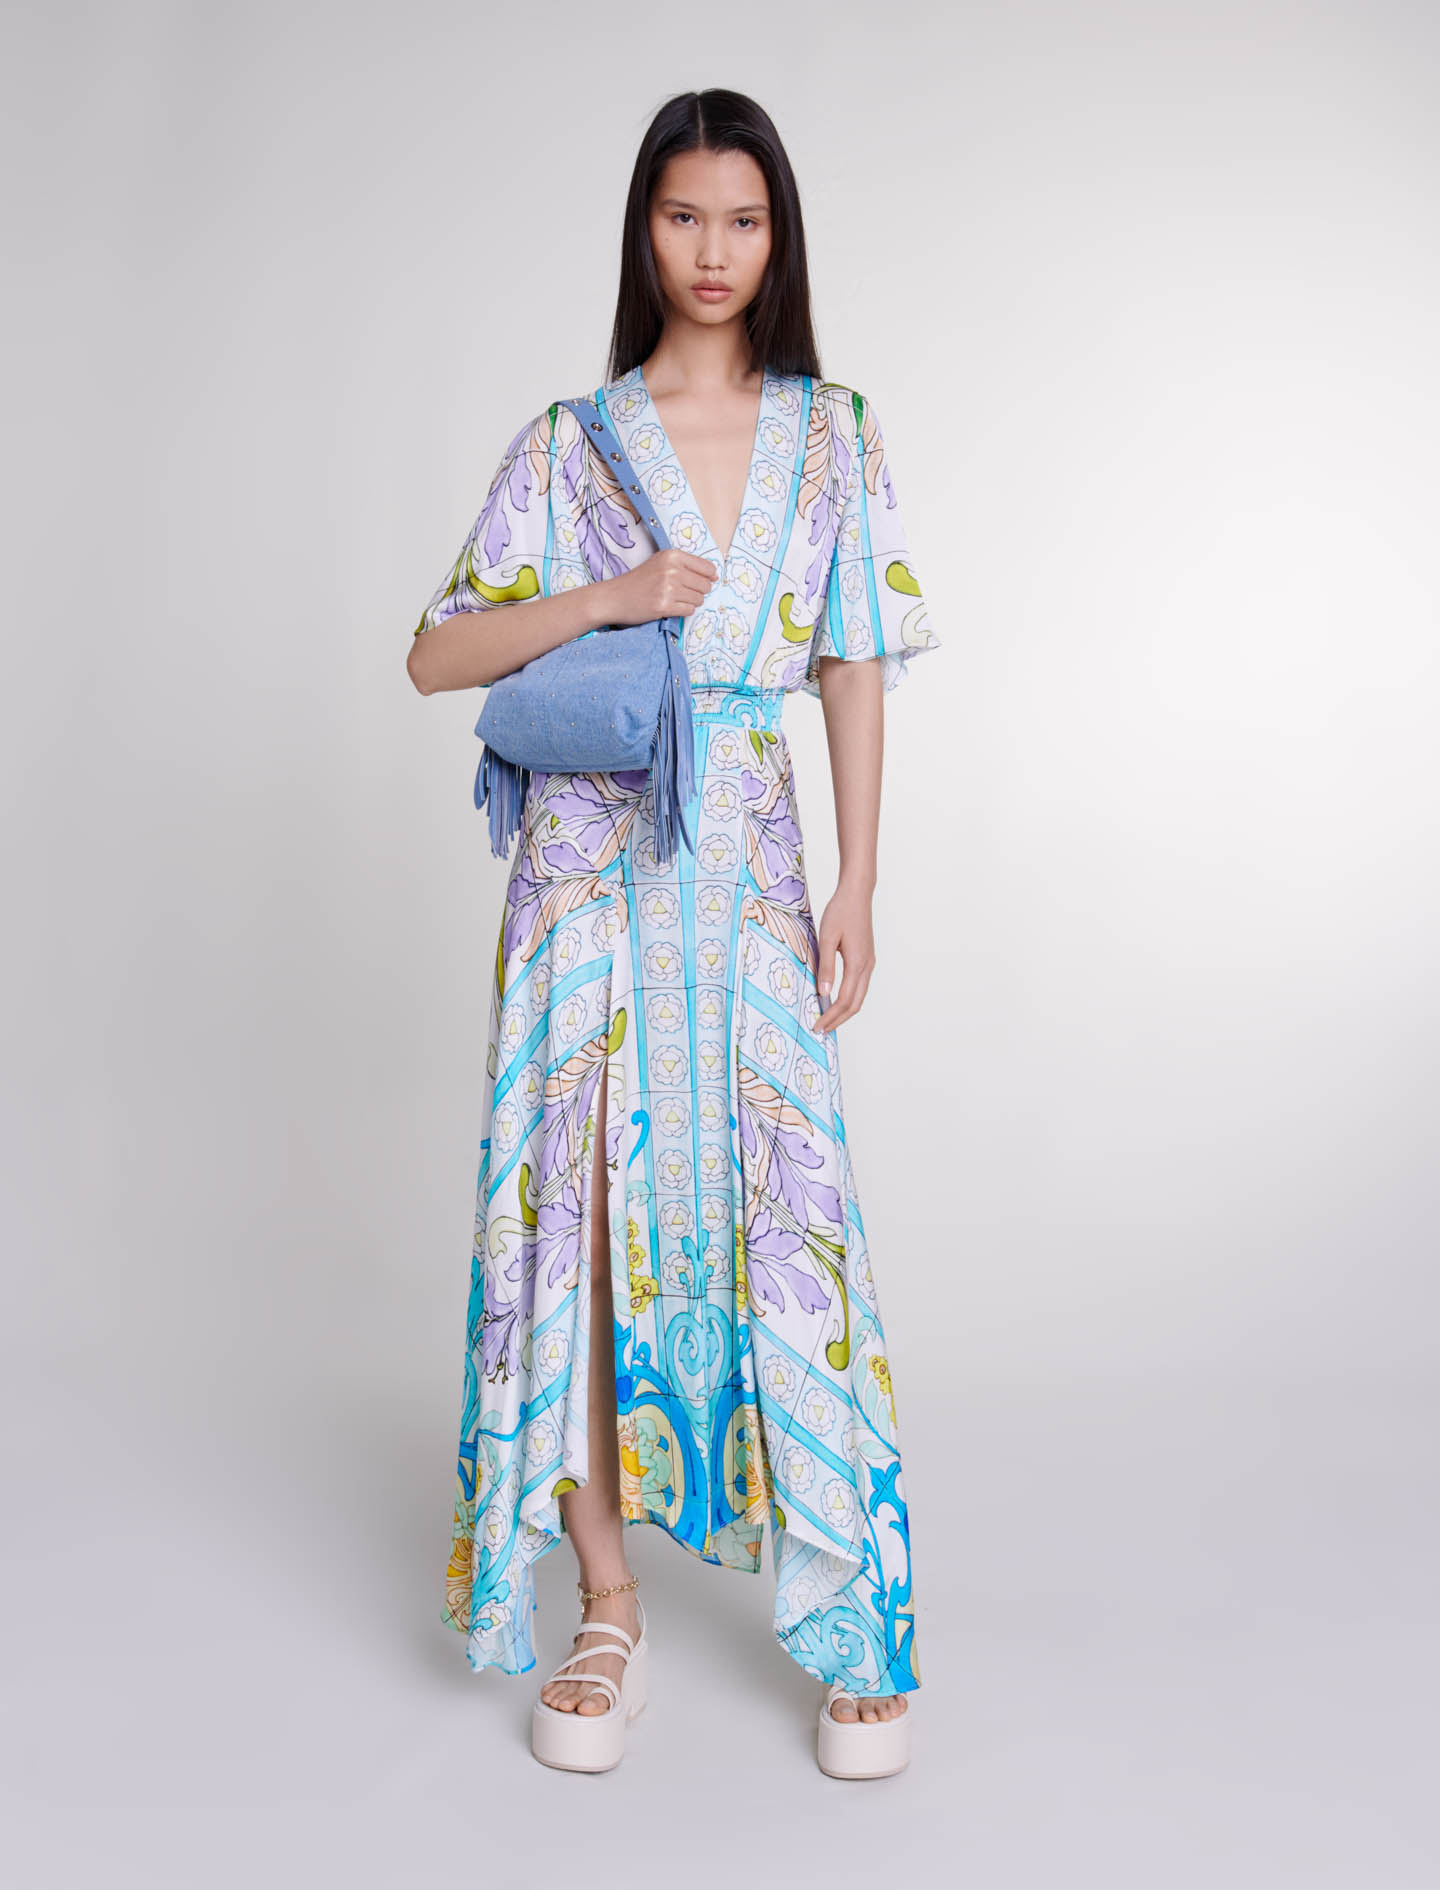 Maje Woman's viscose Secondary fabric: Satin-look patterned maxi dress, in color Print Mozaic /